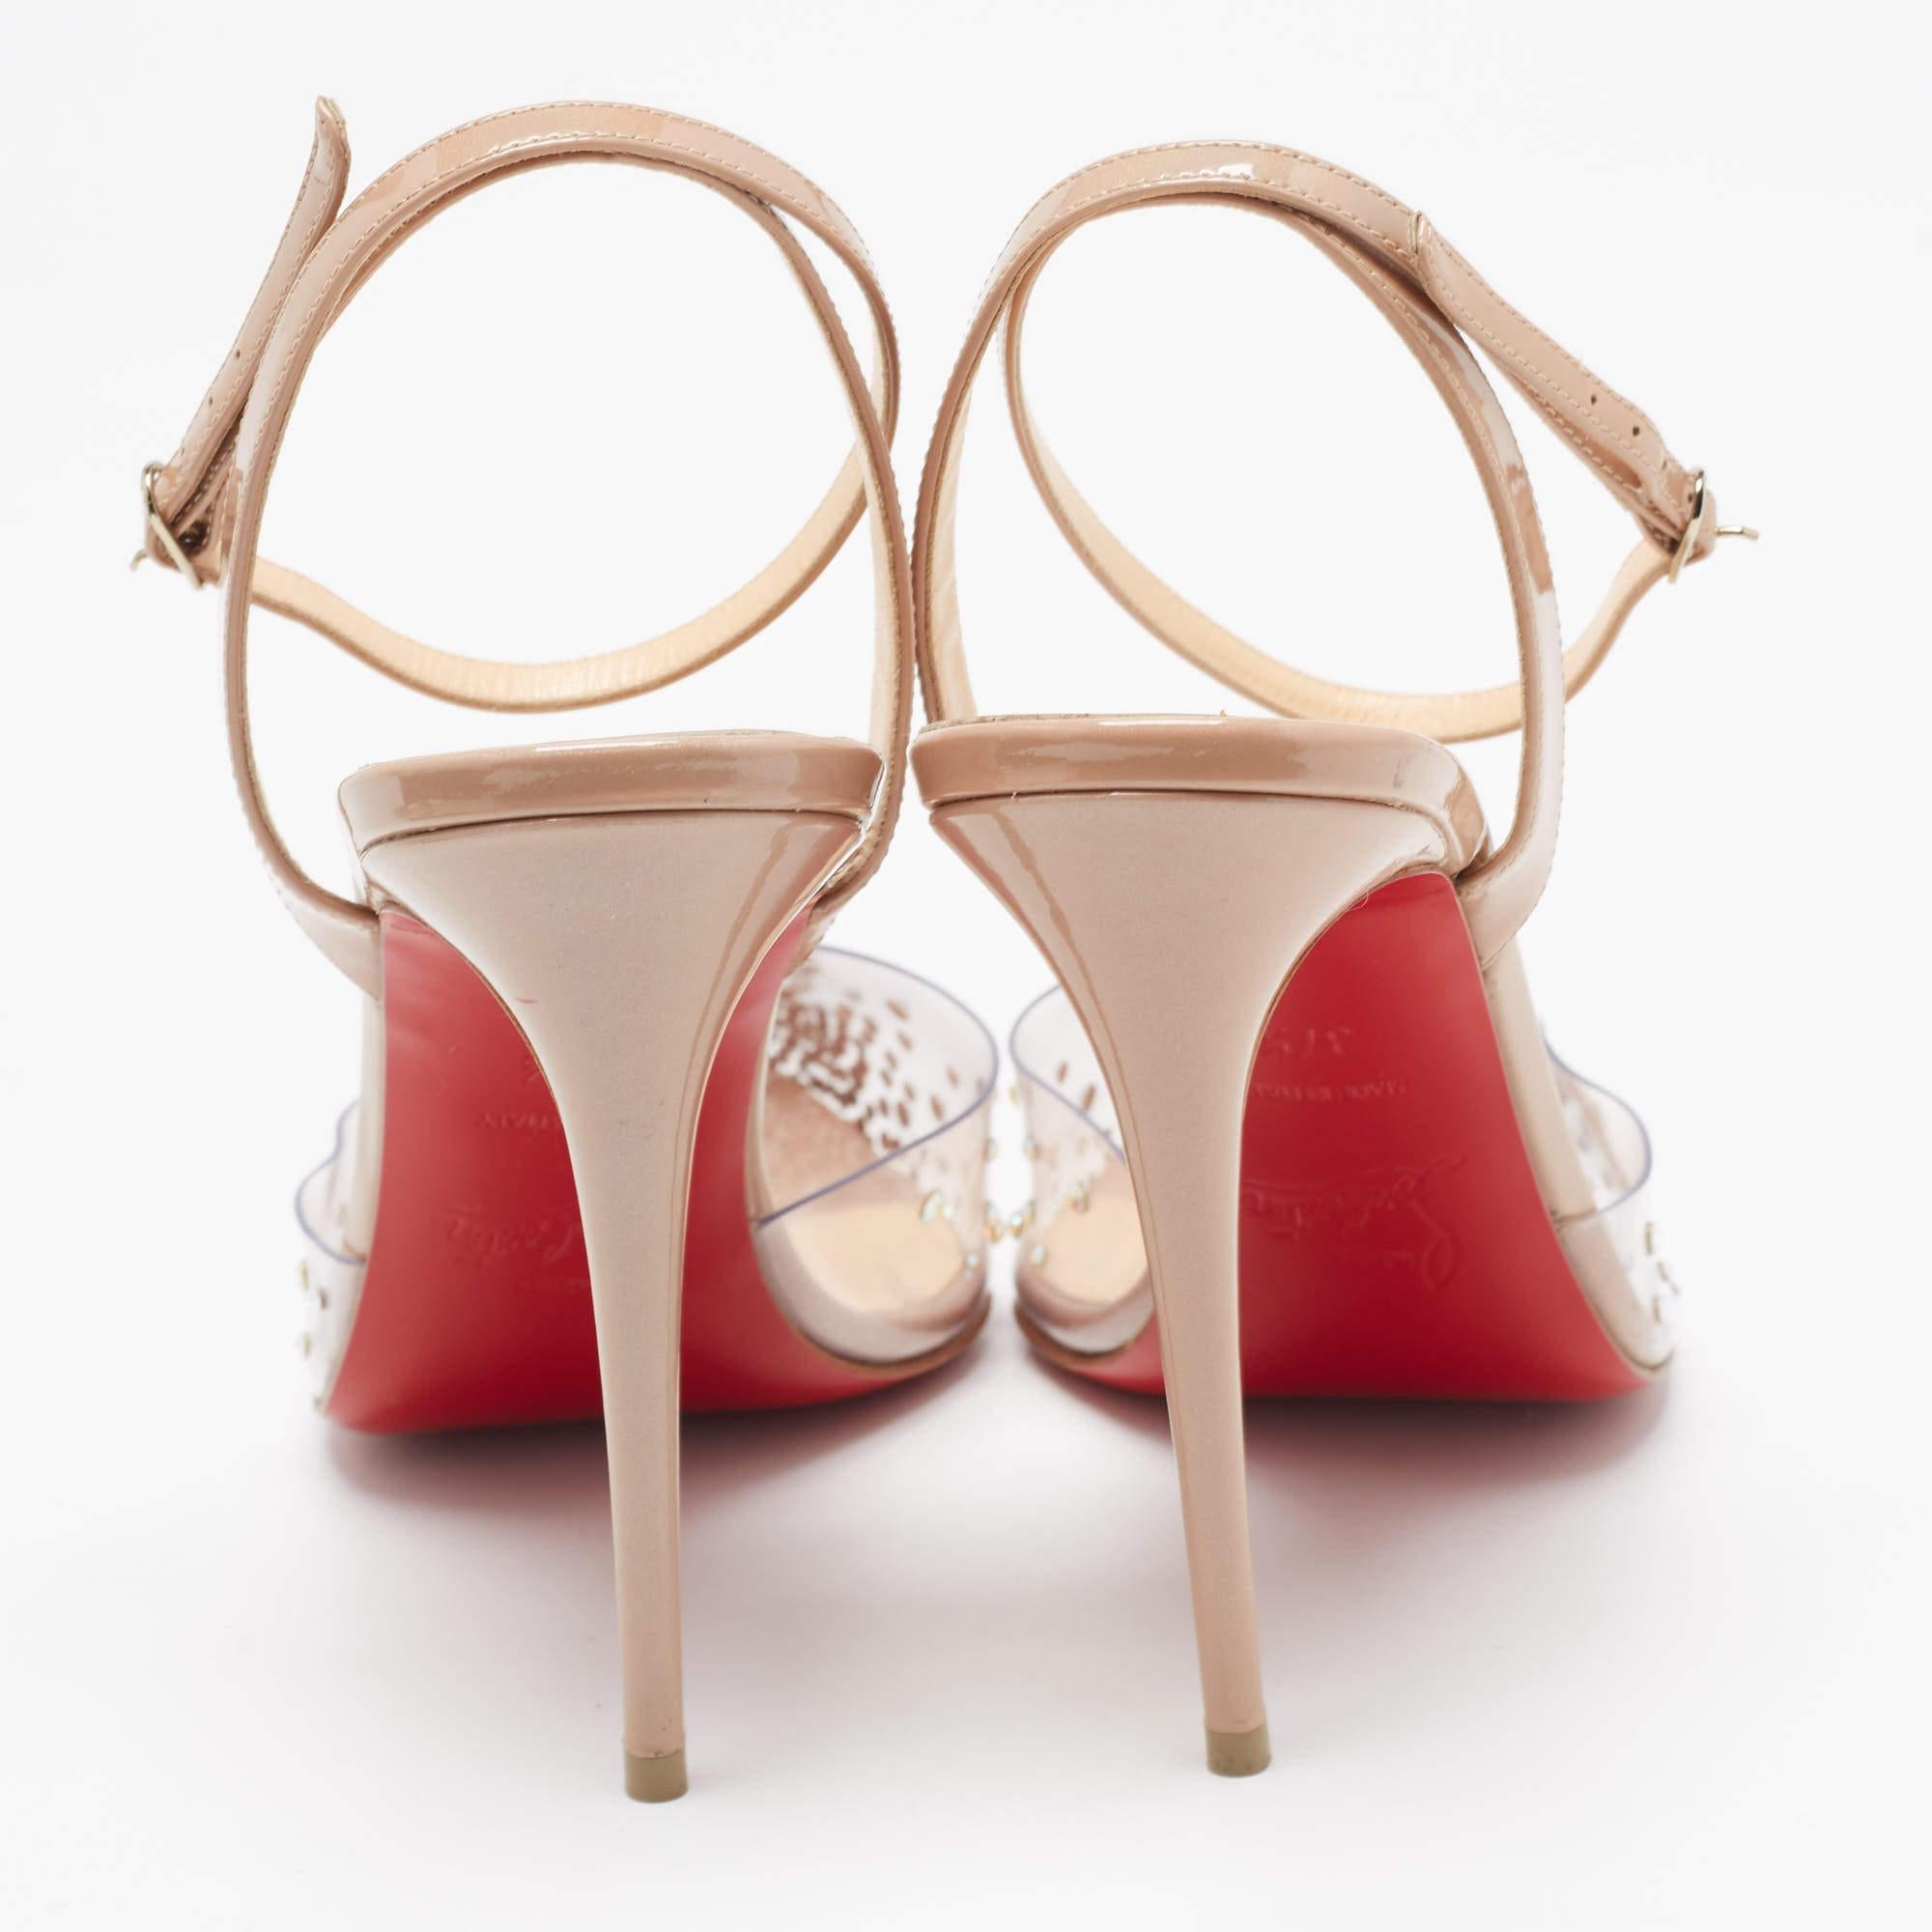 Christian Louboutin Beige Patent Leather and PVC Ankle Strap Pumps Size 37.5 In Good Condition For Sale In Dubai, Al Qouz 2